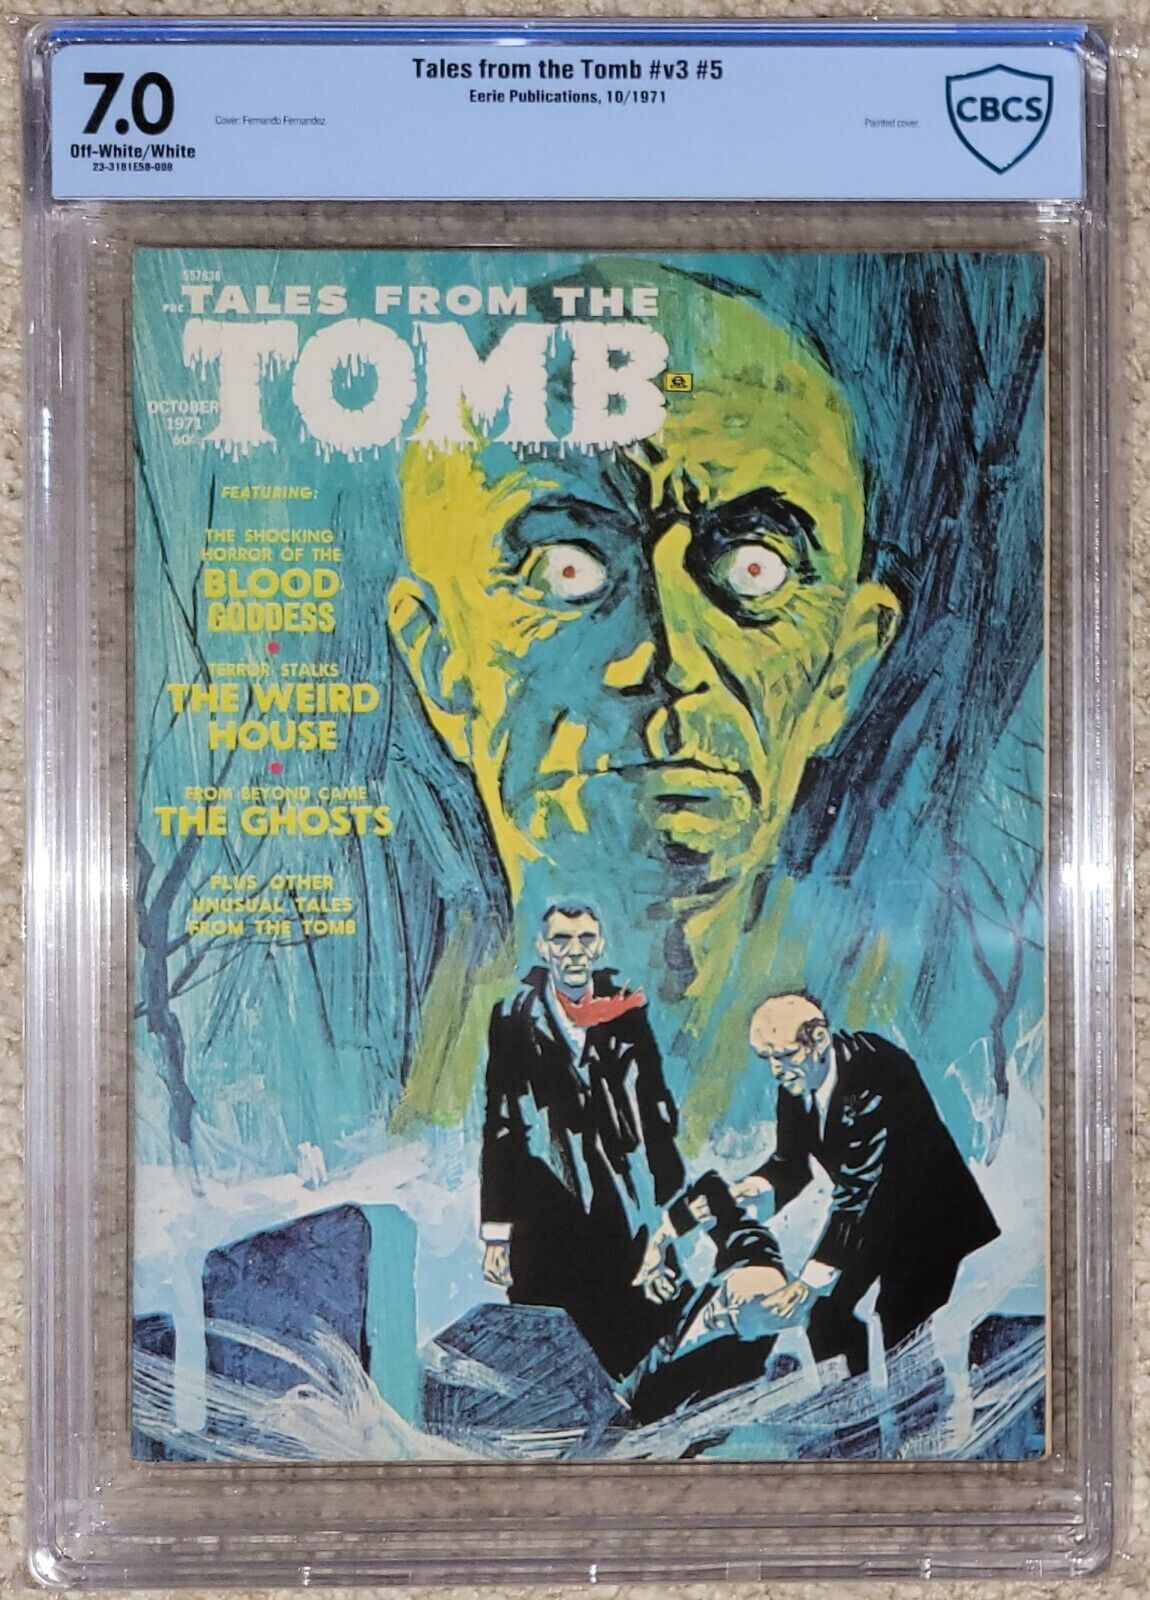 Tales From The Tomb, Eerie Pub. Vol 3,#5 1971 CBCS 7.0 Off W/W.